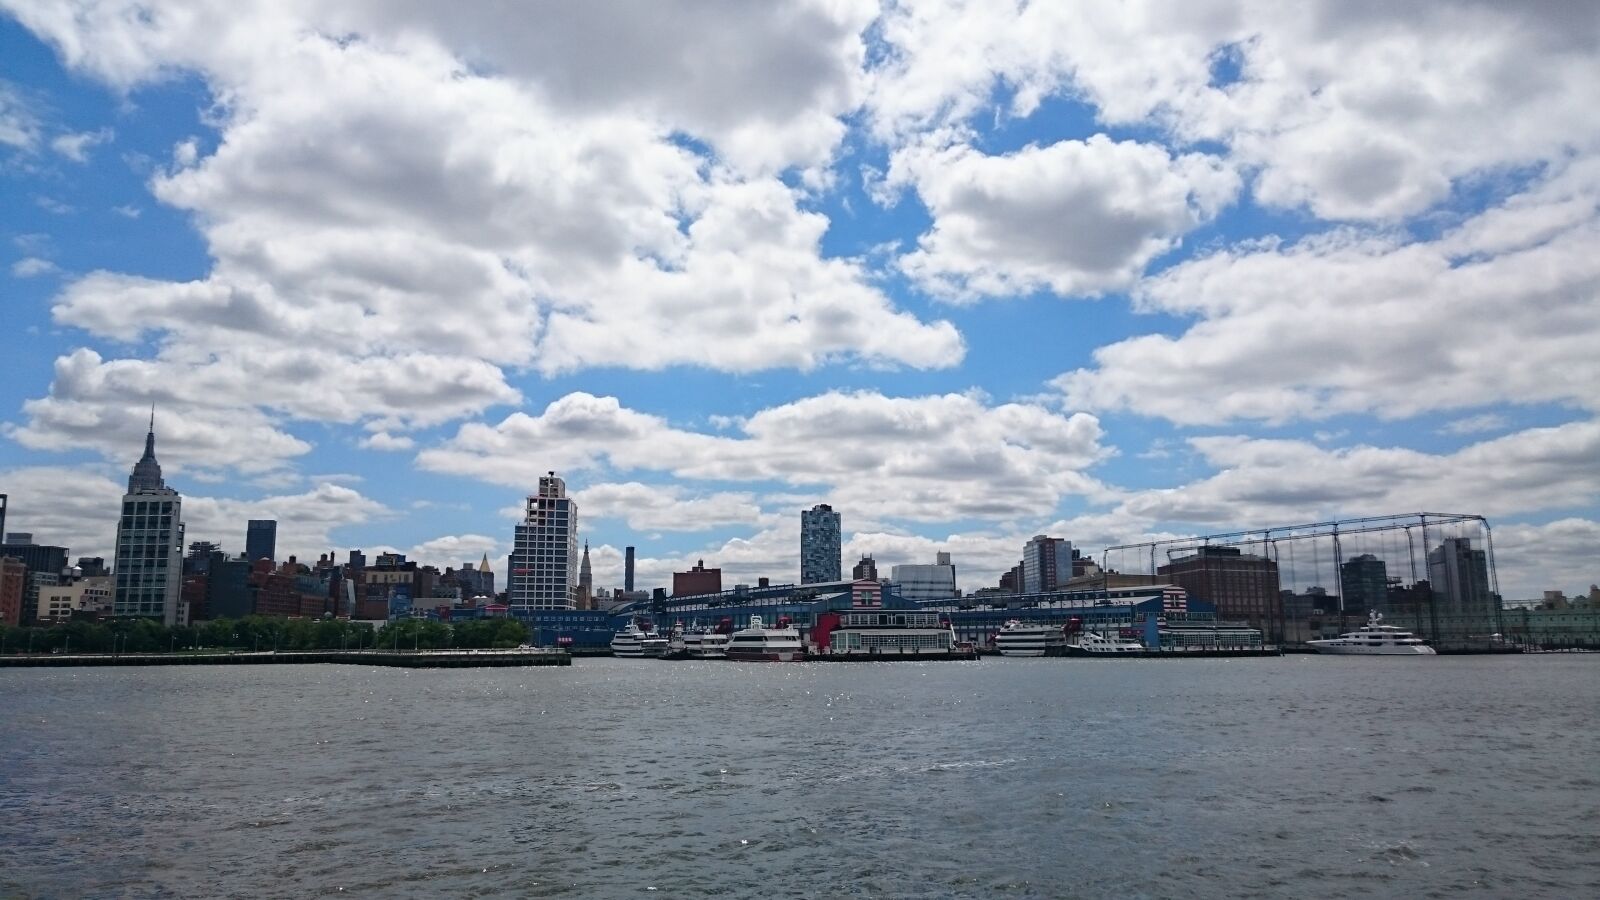 Sony Xperia Z3 sample photo. Clouds, city, riverside photography